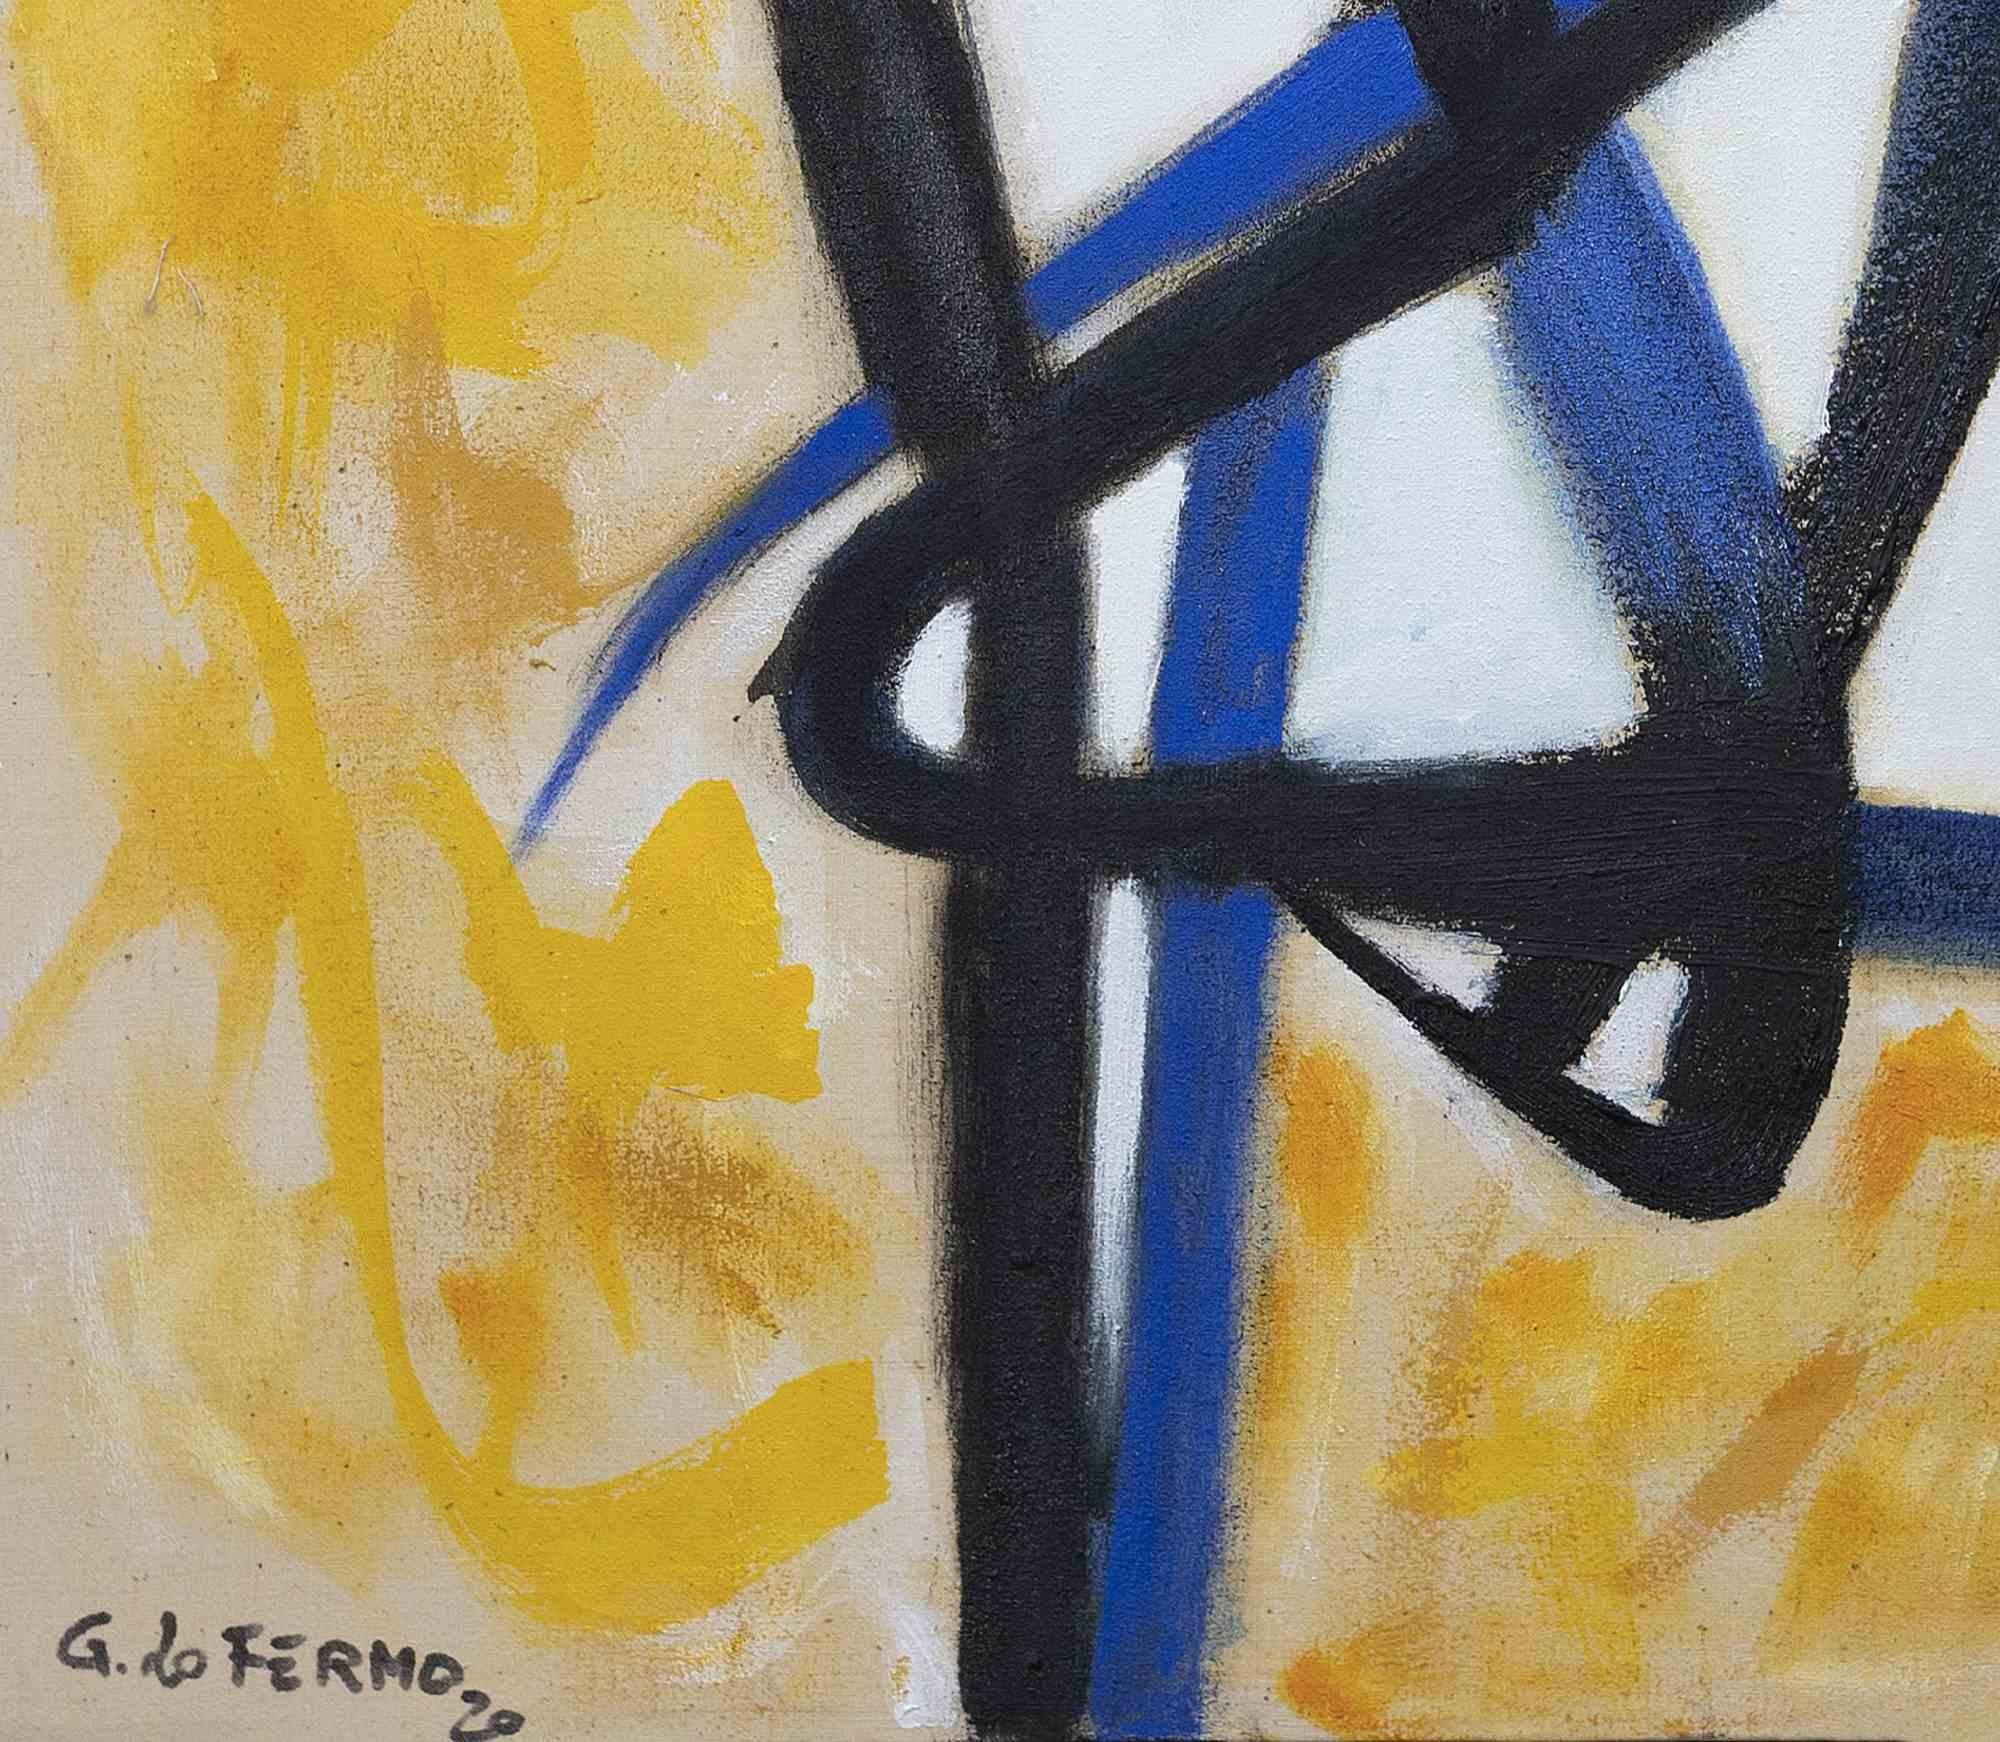 Abstract Expression - Oil On Canvas by Giorgio Lo Fermo - 2020s For Sale 2